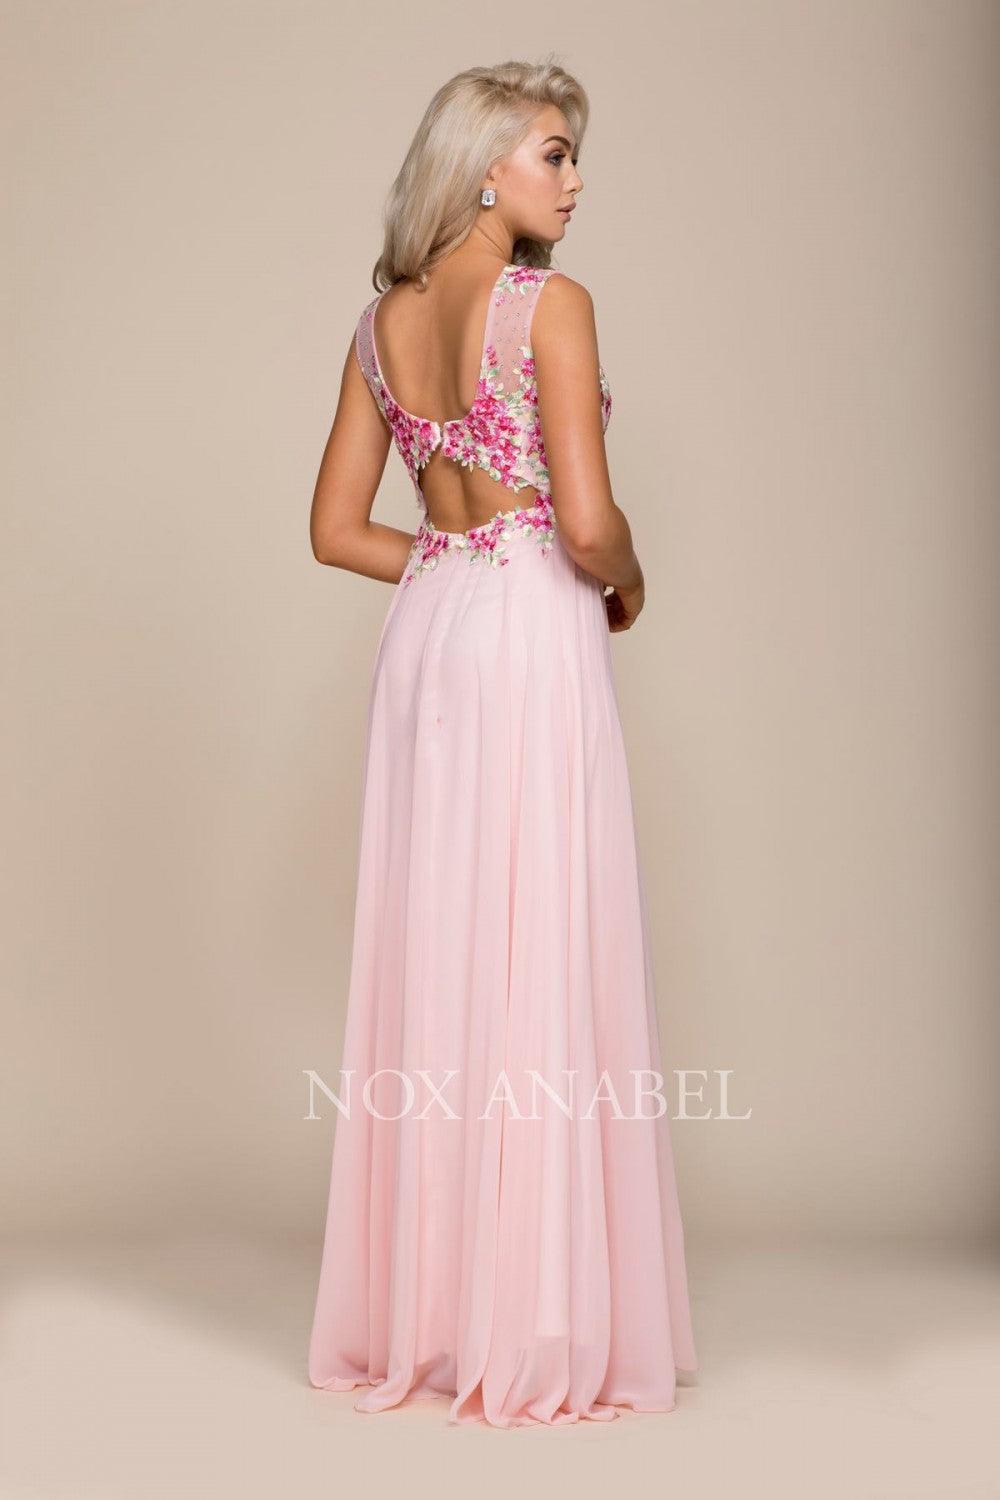 Long Sleeveless Prom Dress Formal - The Dress Outlet Nox Anabel